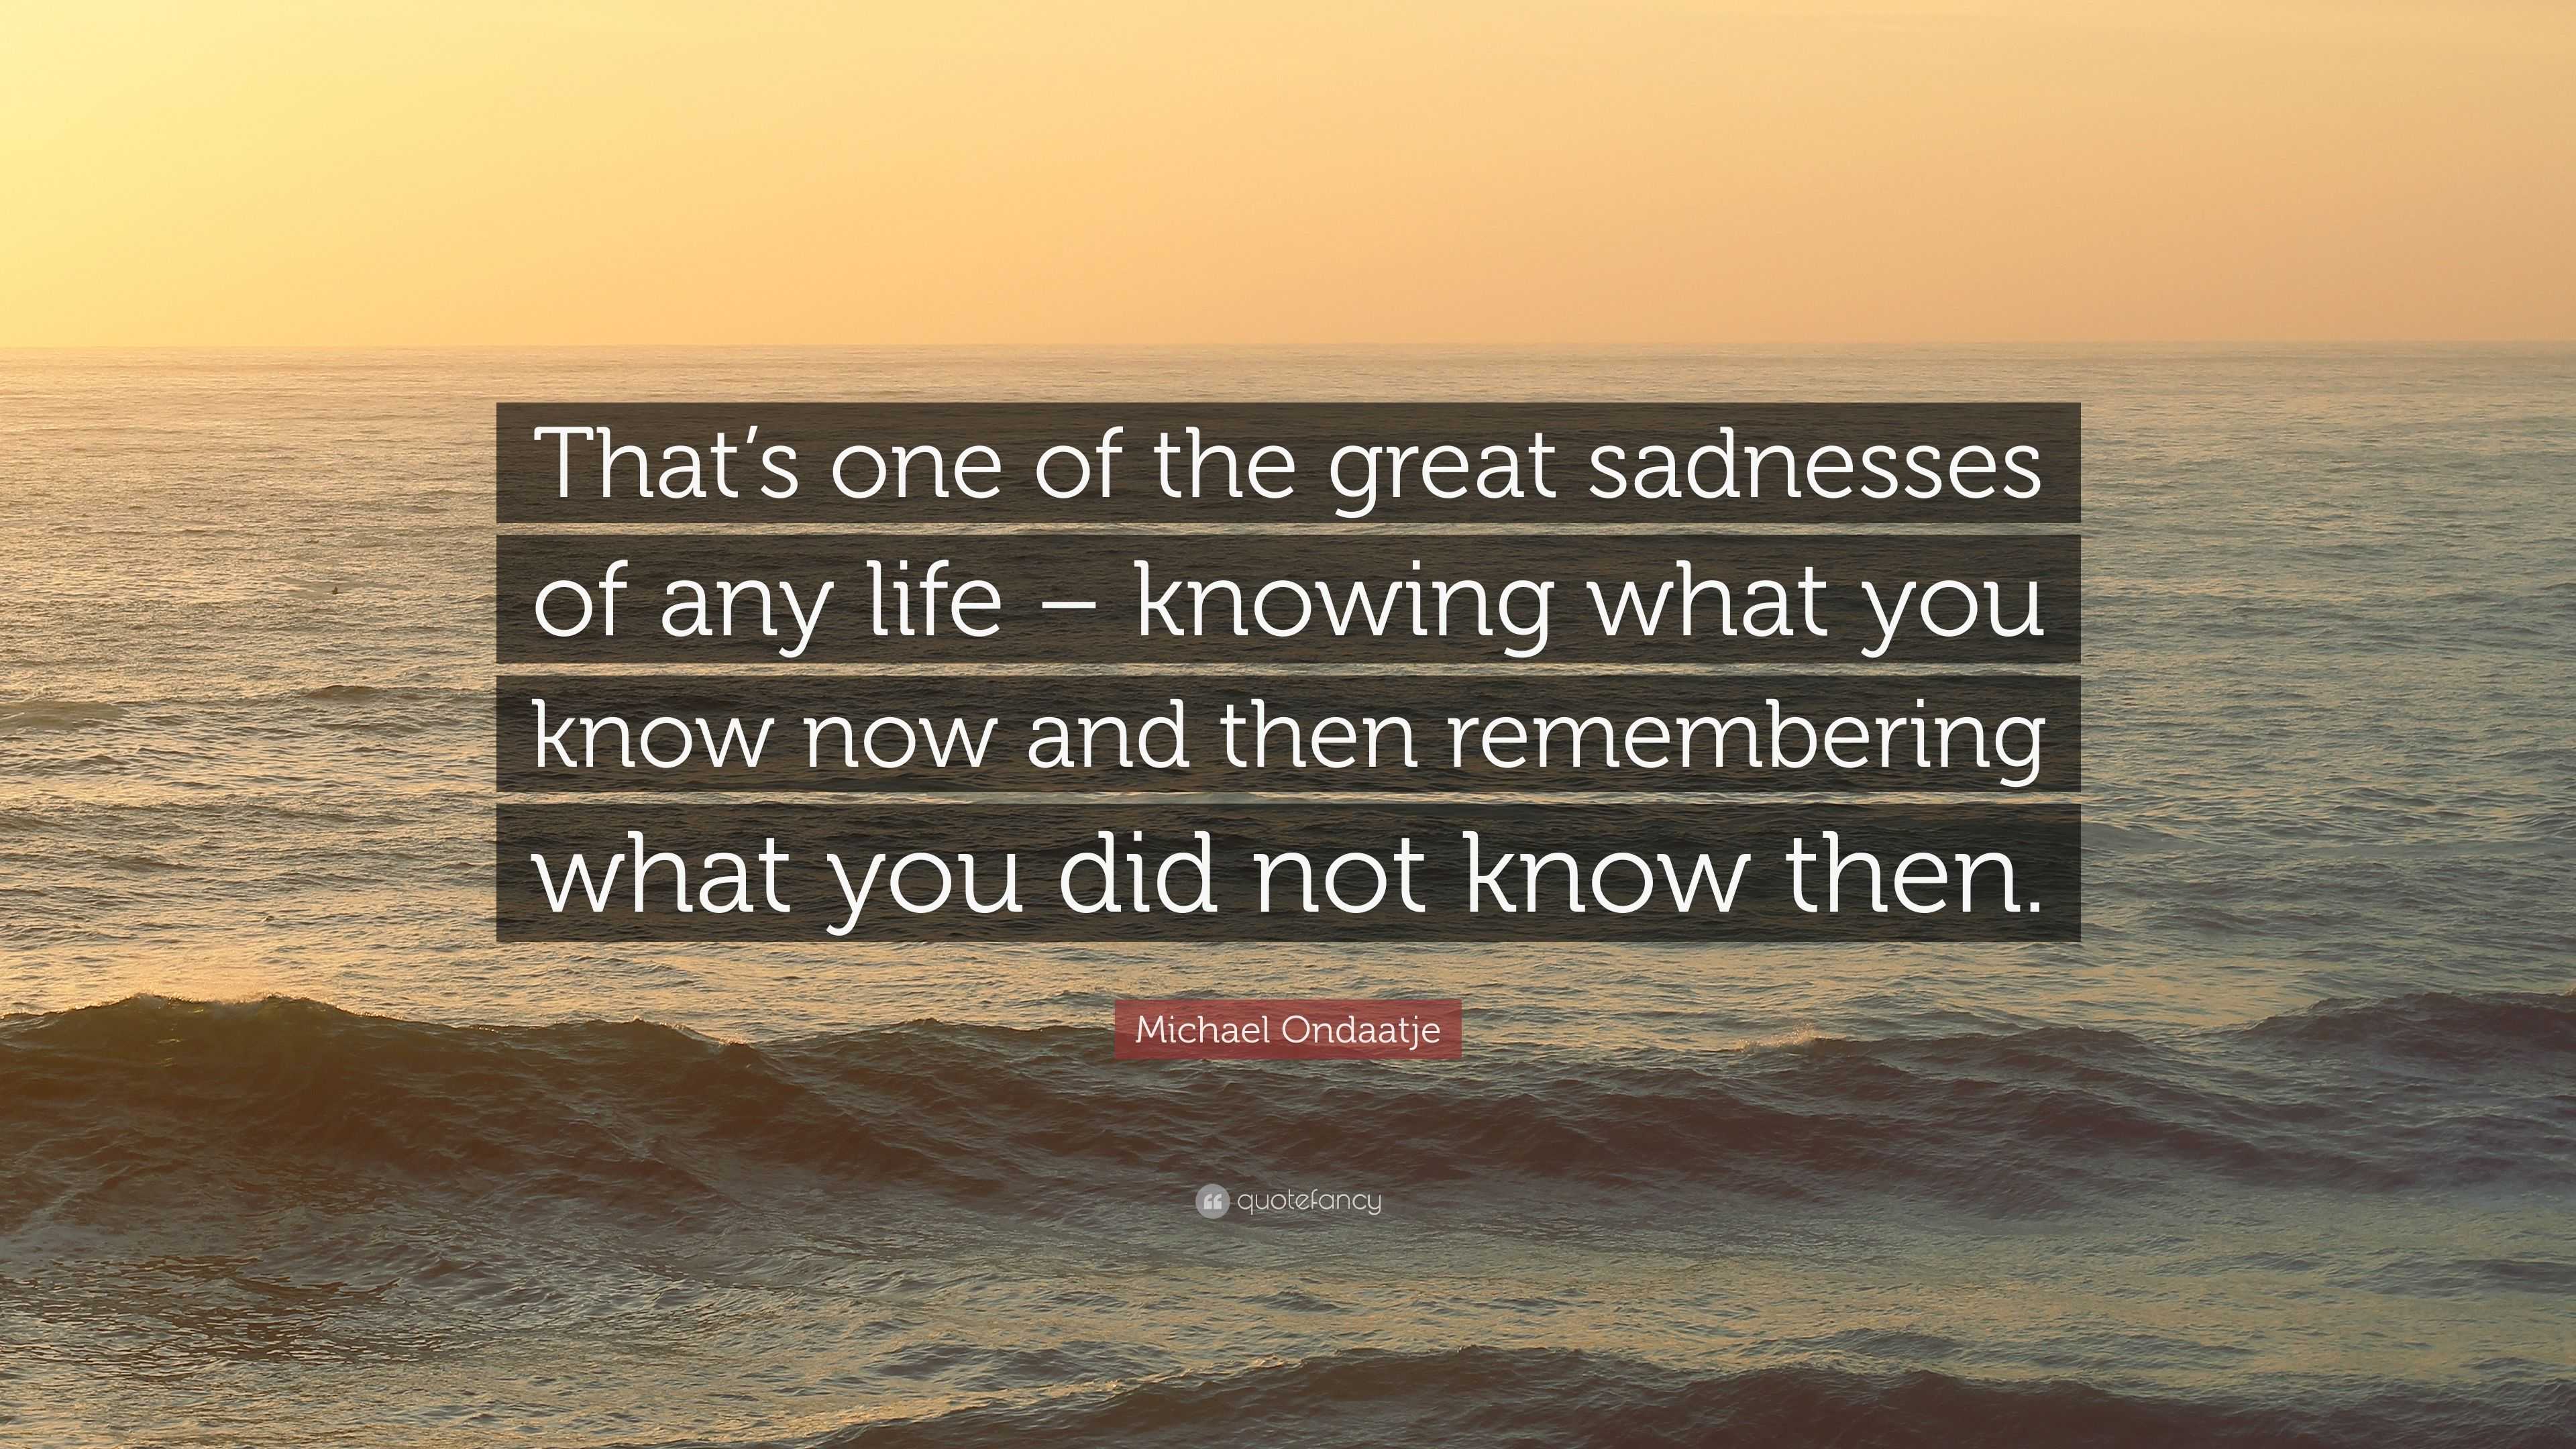 Michael Ondaatje Quote: “That’s one of the great sadnesses of any life ...